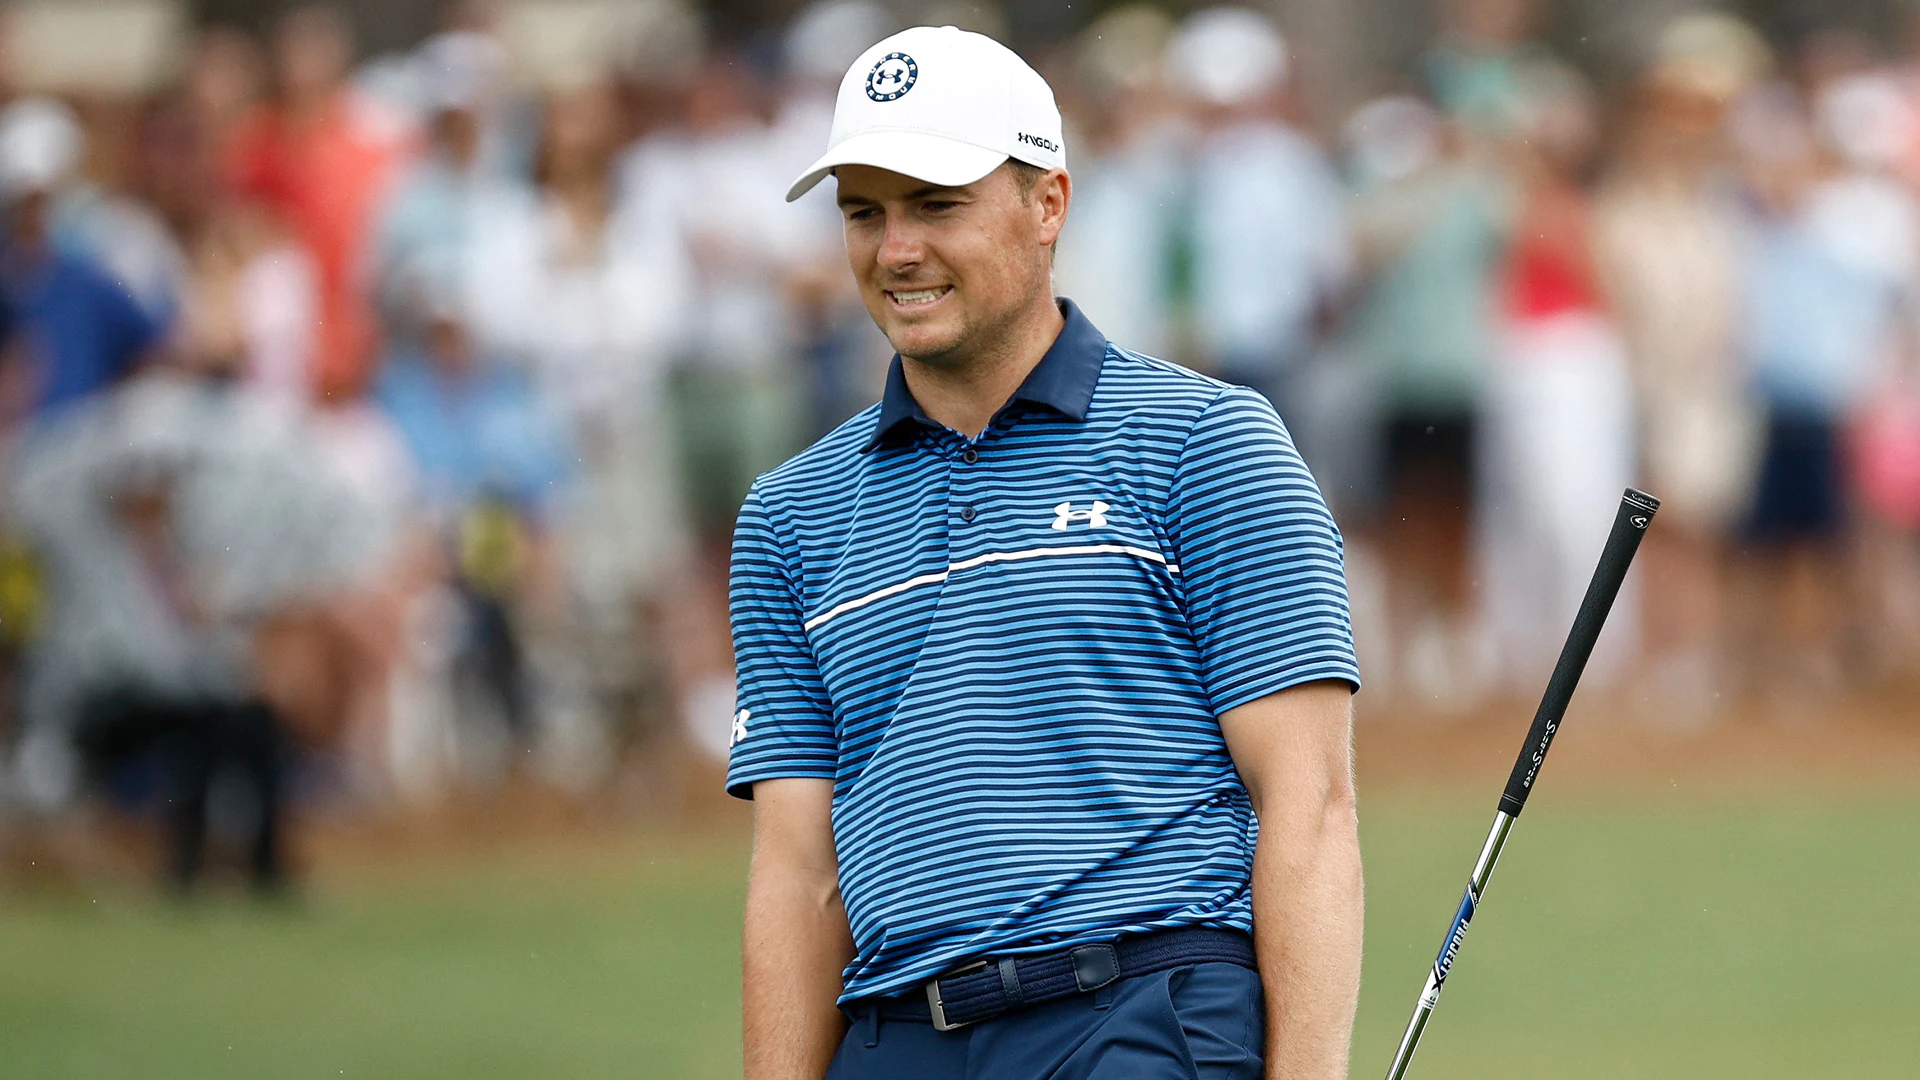 Watch: Jordan Spieth closes RBC Heritage Round 3 with brutal lip out from 18 inches